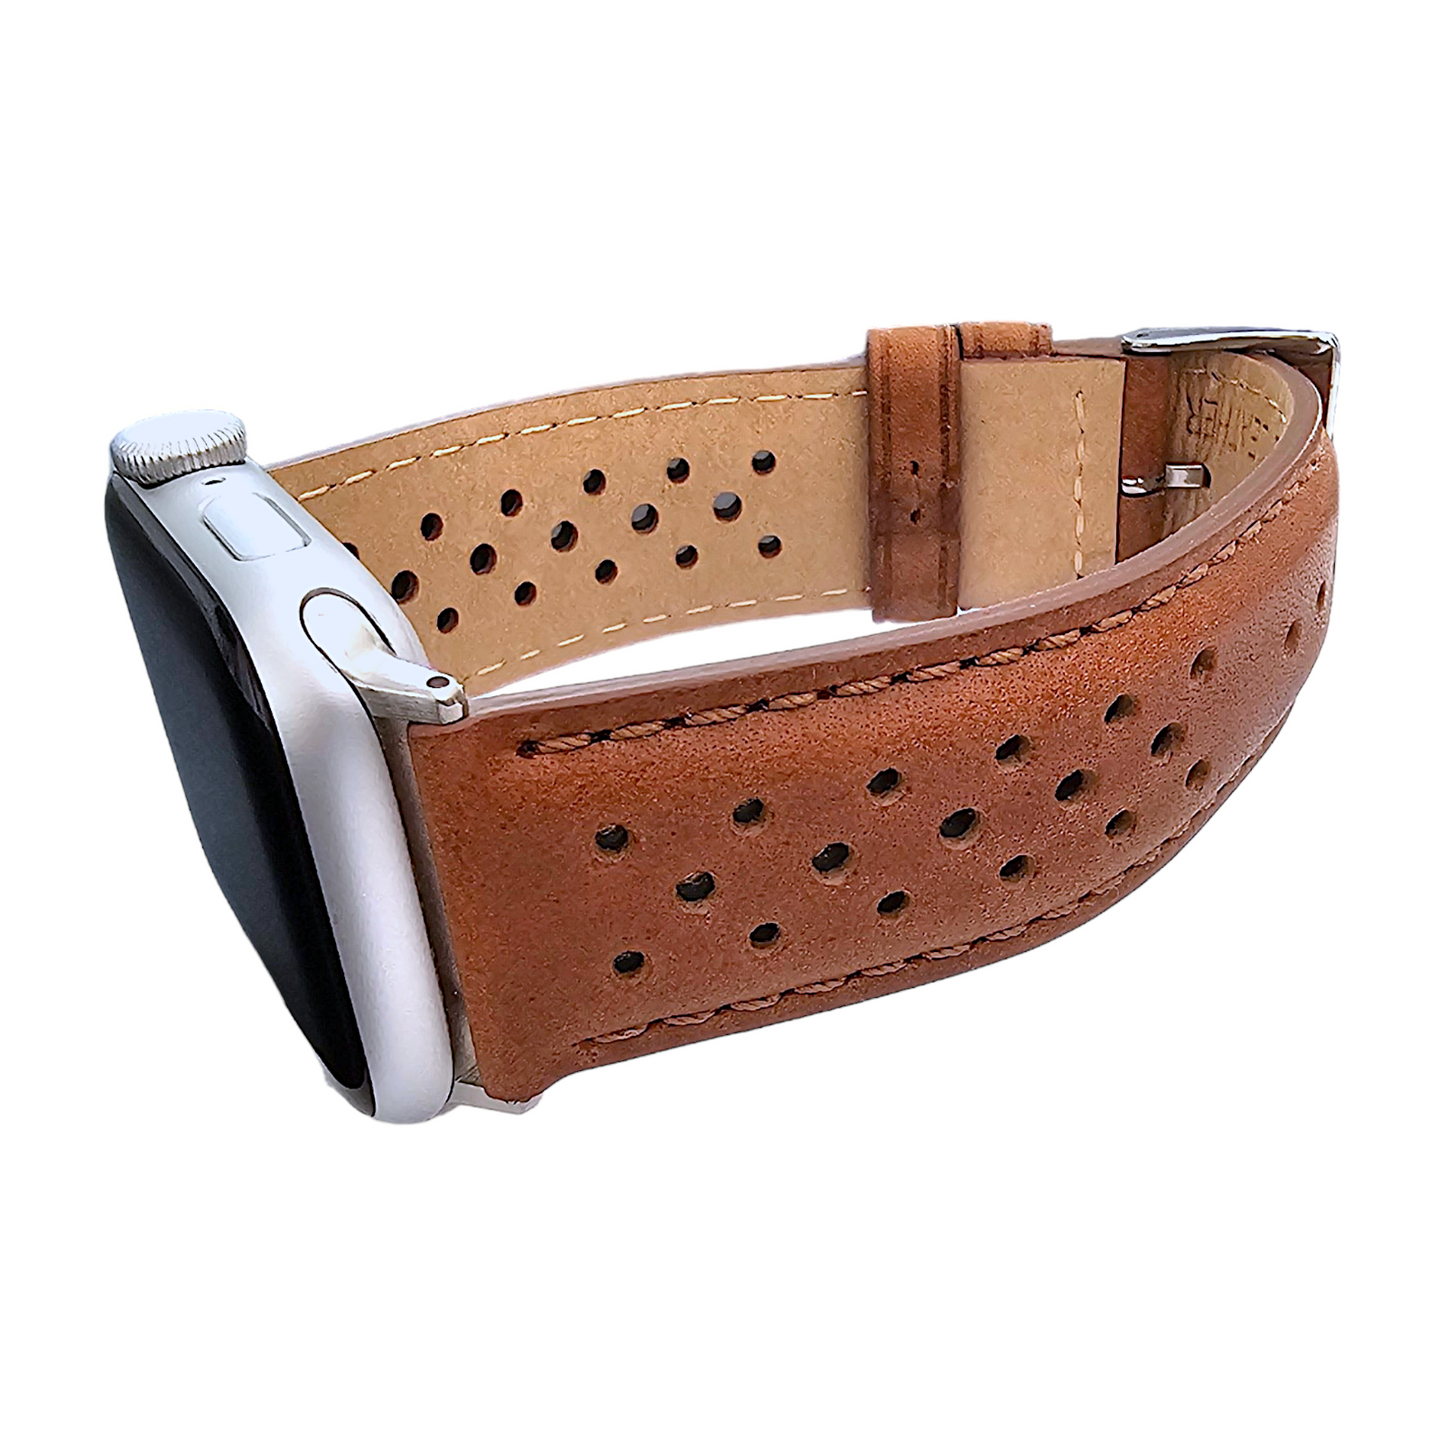 Horween Leather Watch Strap For Apple IWatch